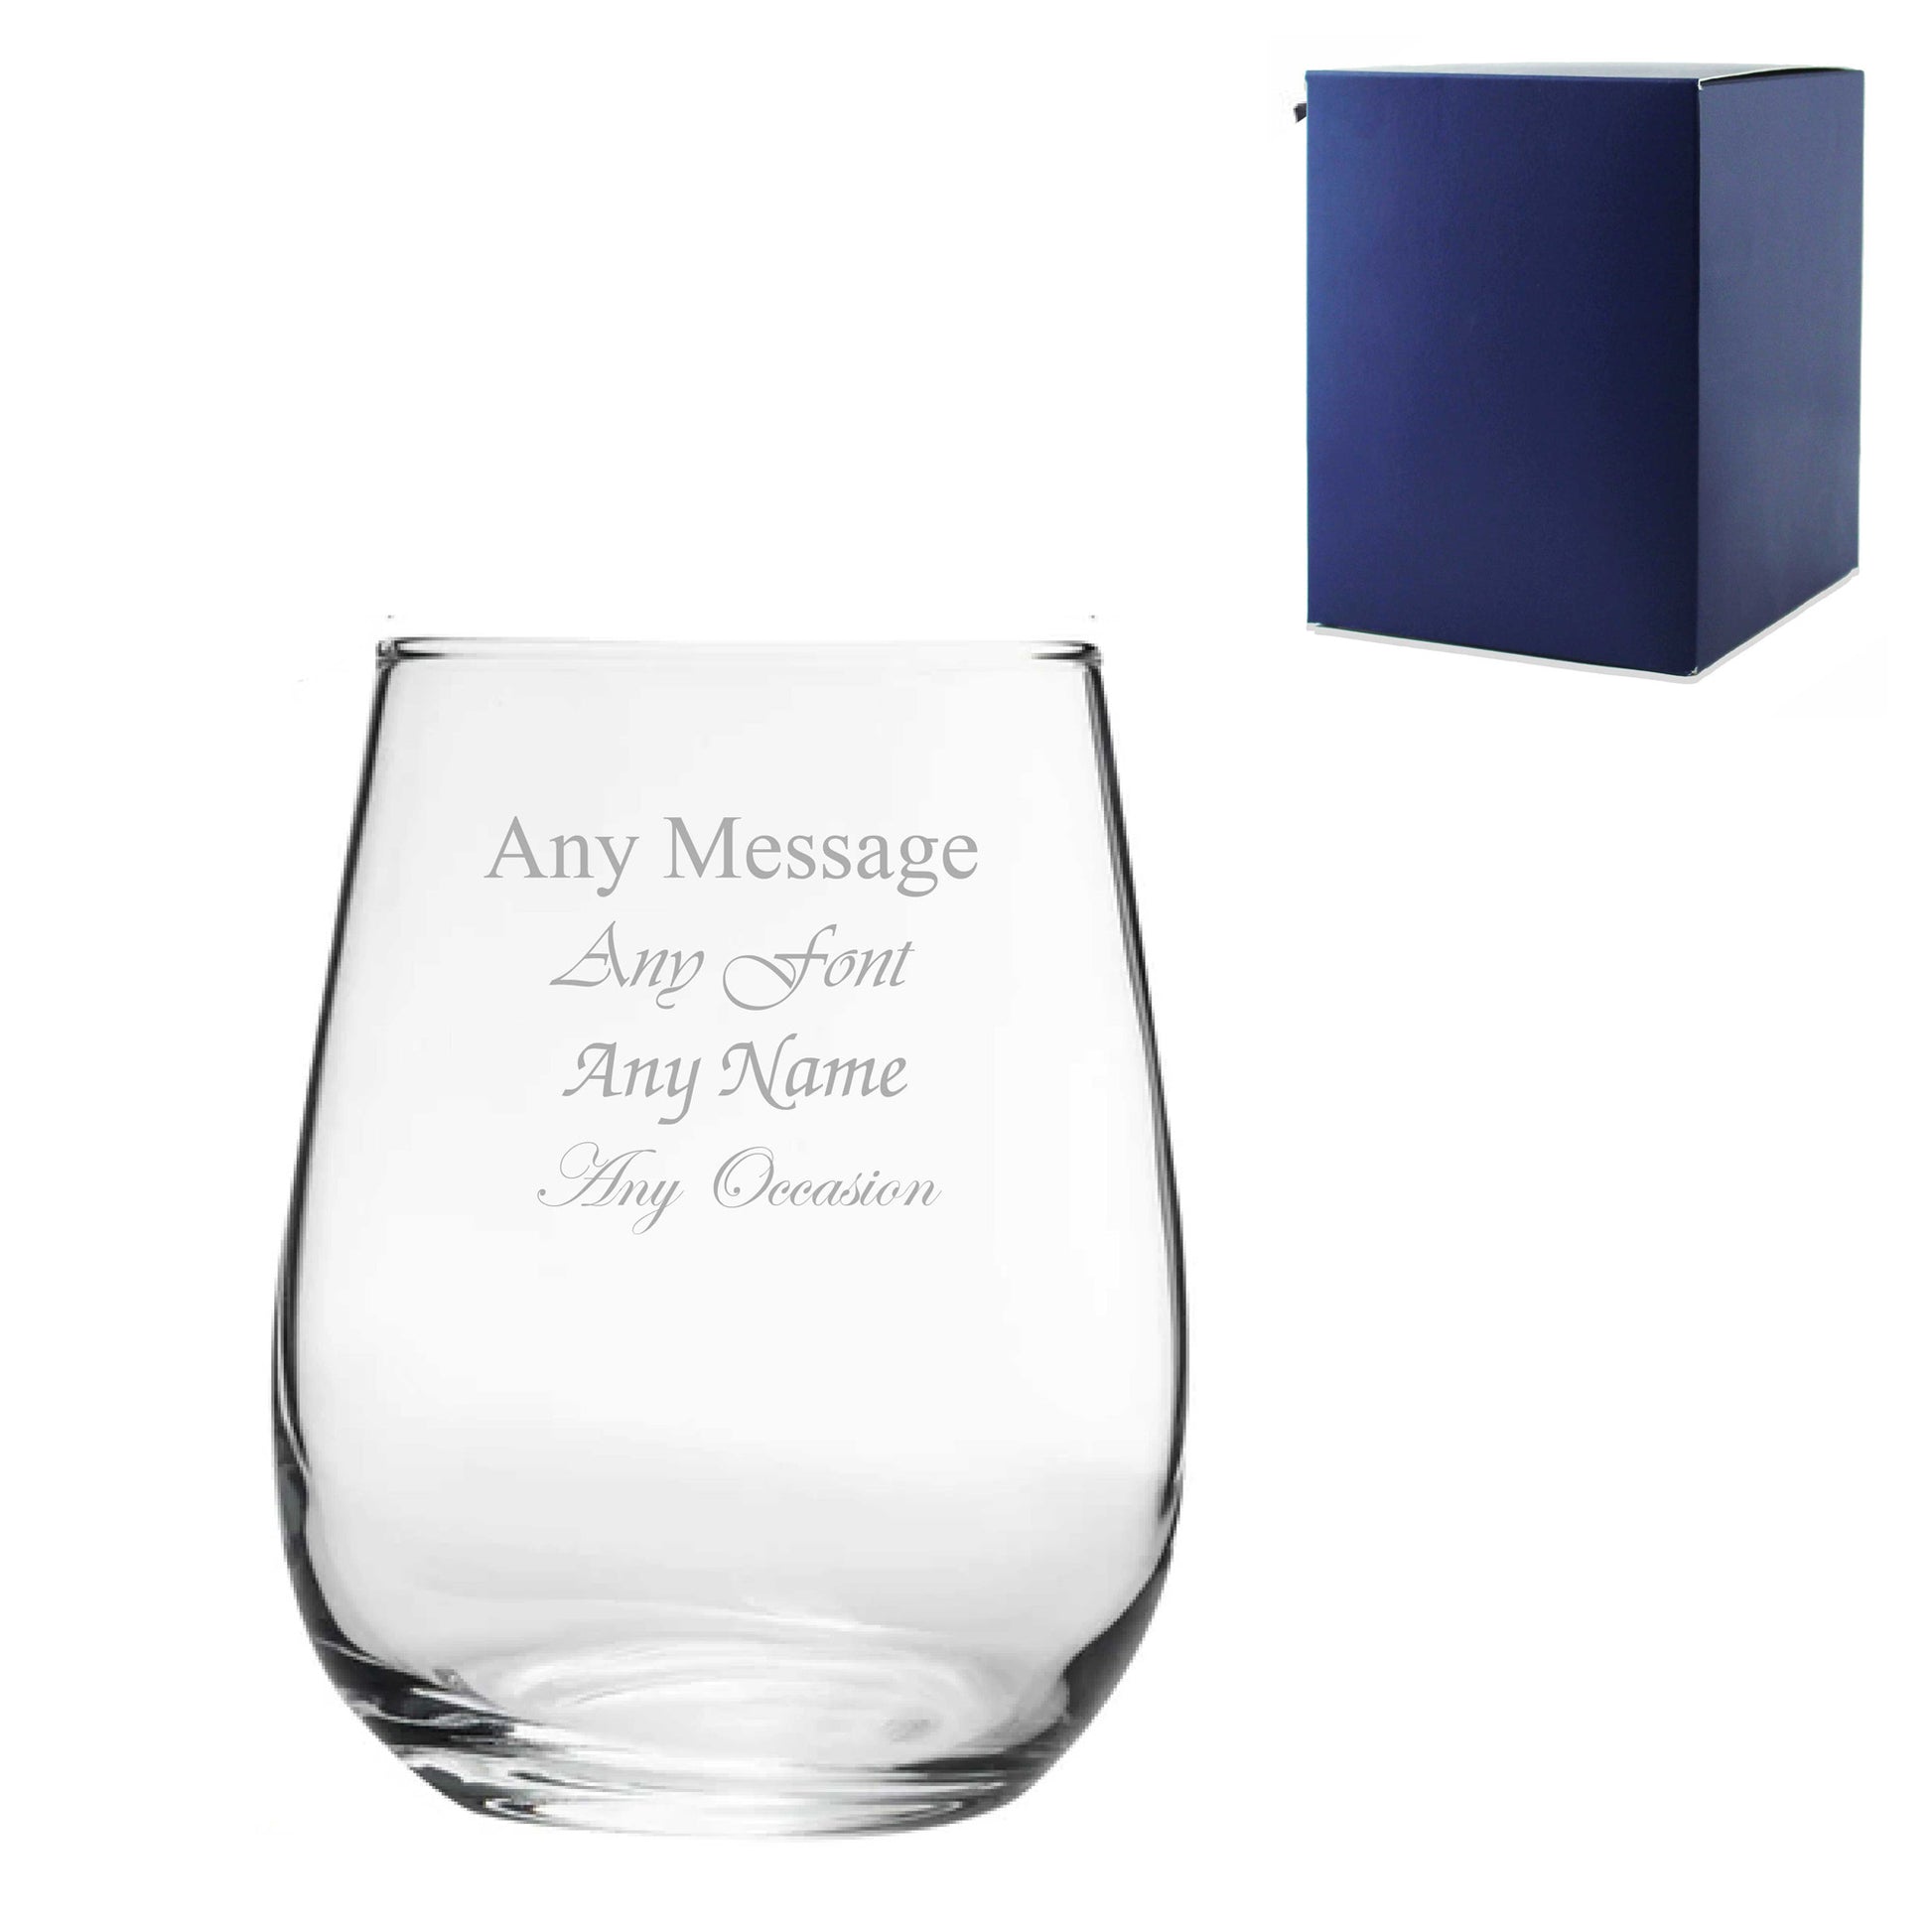 Engraved 360ml Corto Stemless Wine Glass with Gift Box Image 2